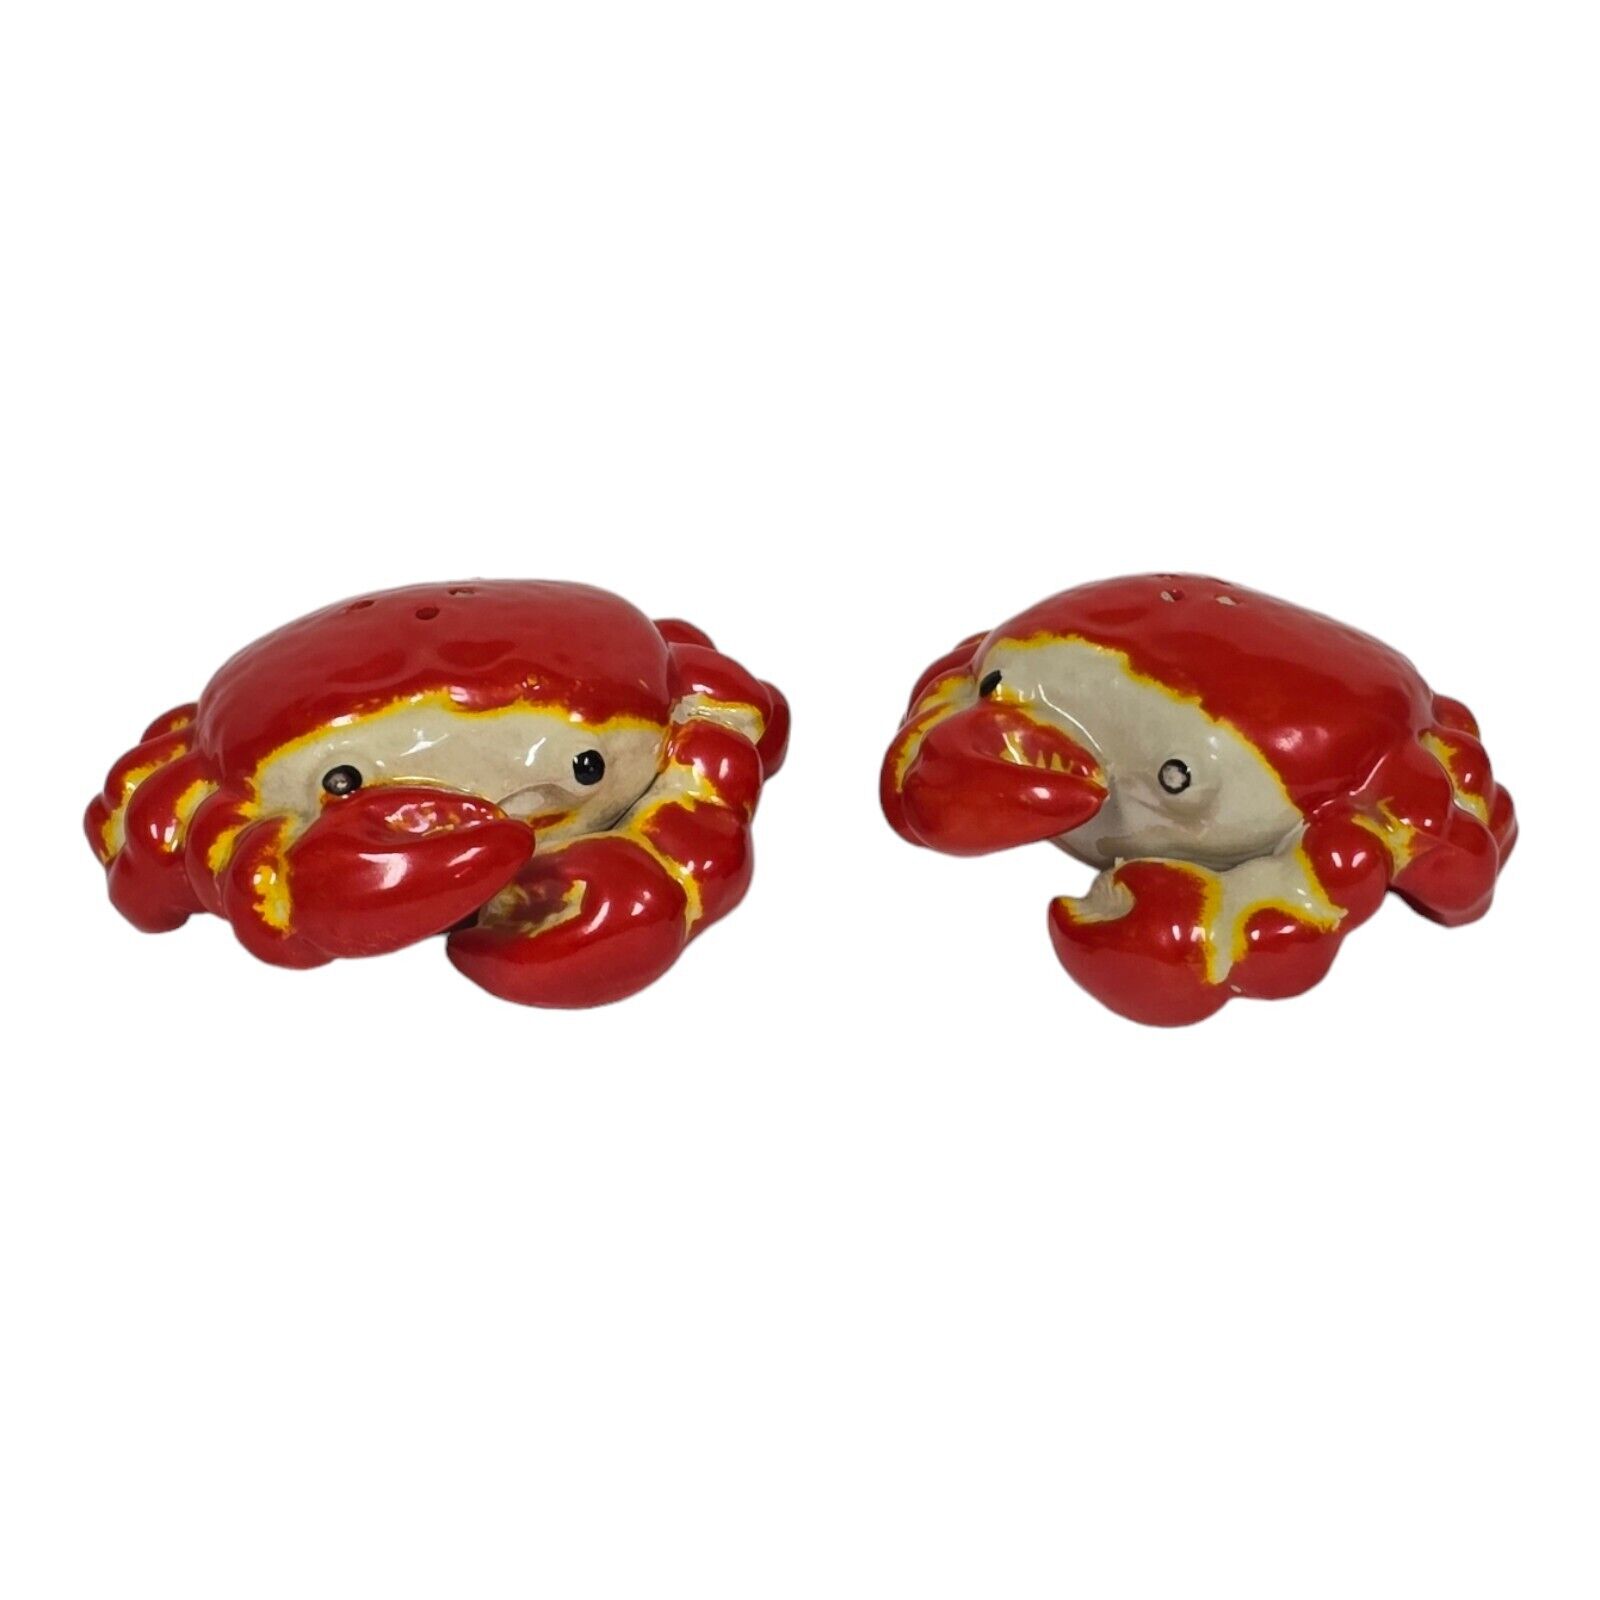 Vtg 1950s Norcrest Red Crabs Salt & Peppers Shakers MCM Kitchen Nautical Decor